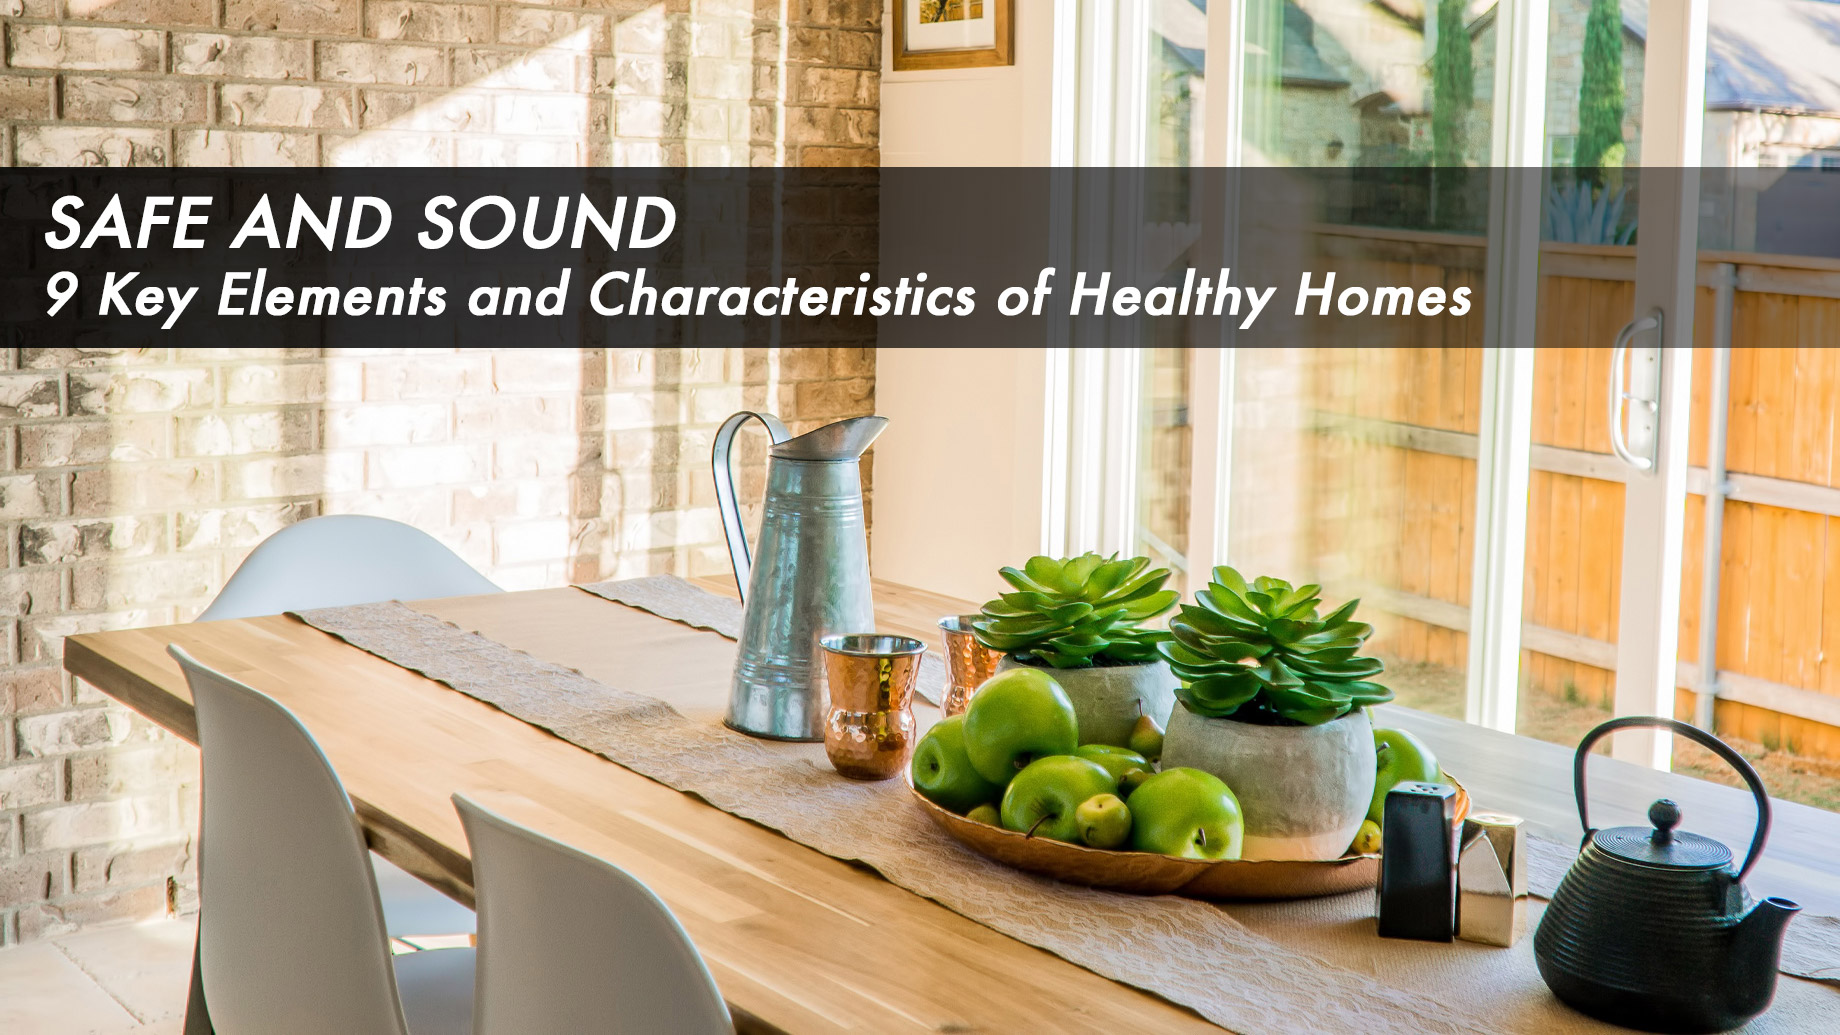 Safe and Sound - 9 Key Elements and Characteristics of Healthy Homes